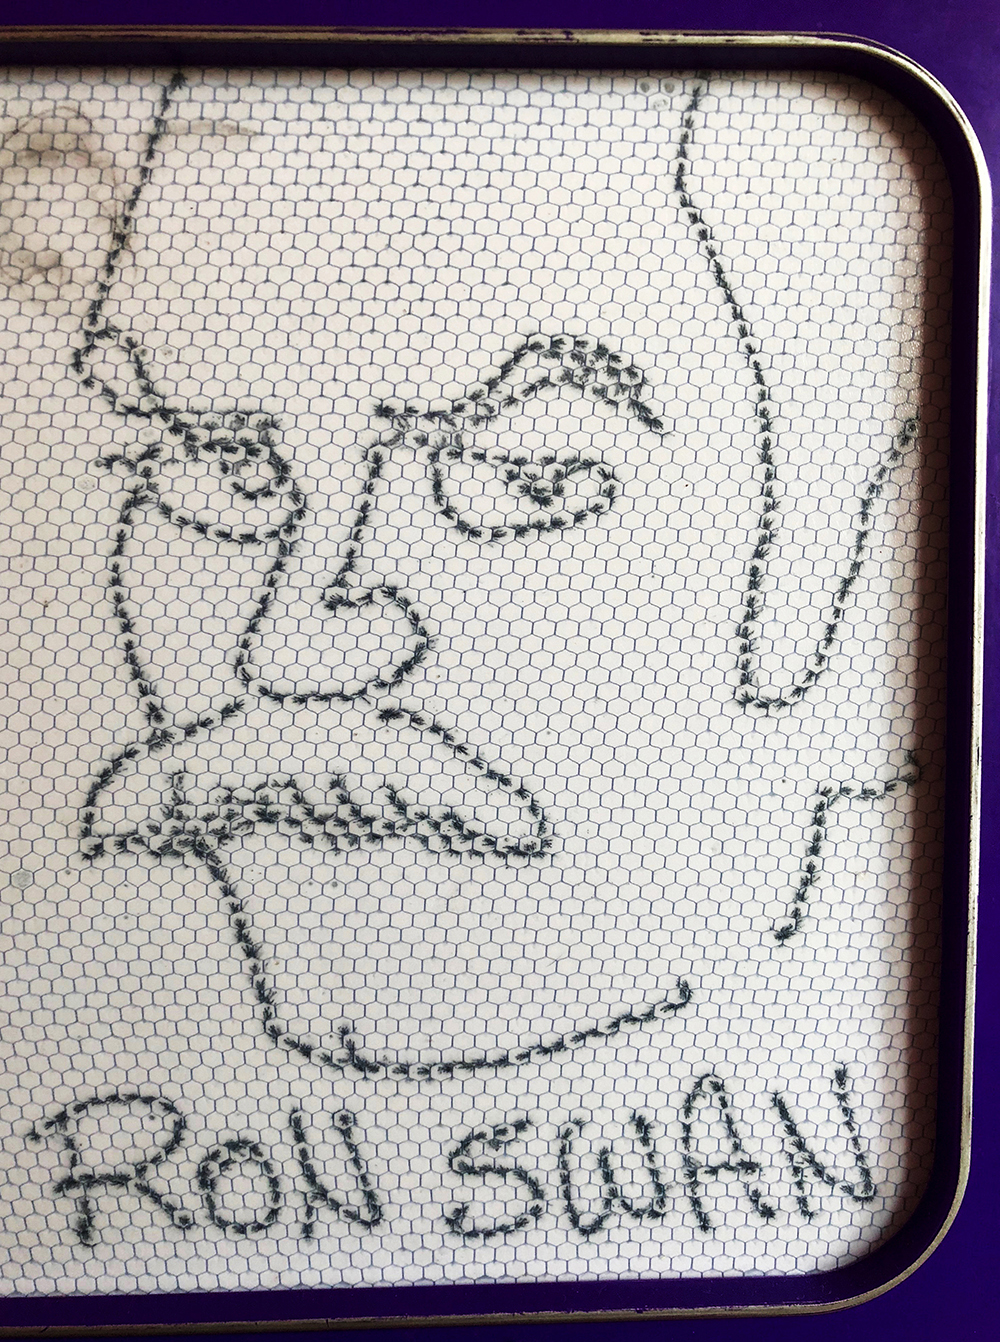 Caricature of Ron Swanson by Jesse Baggs.